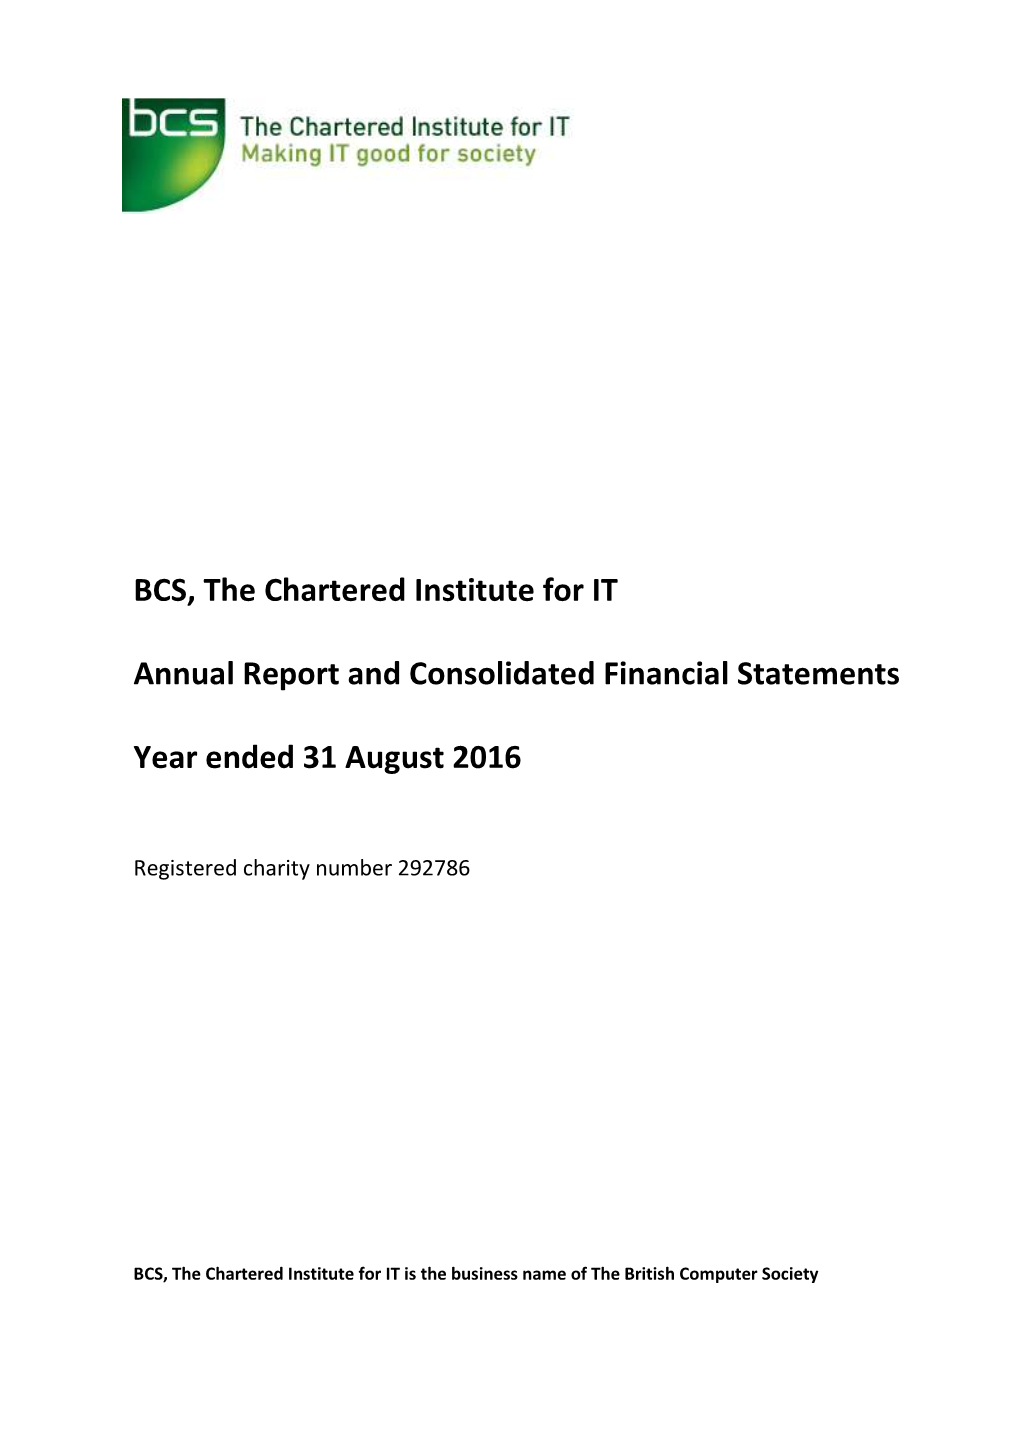 BCS, the Chartered Institute for IT Annual Report and Consolidated Financial Statements Year Ended 31 August 2016